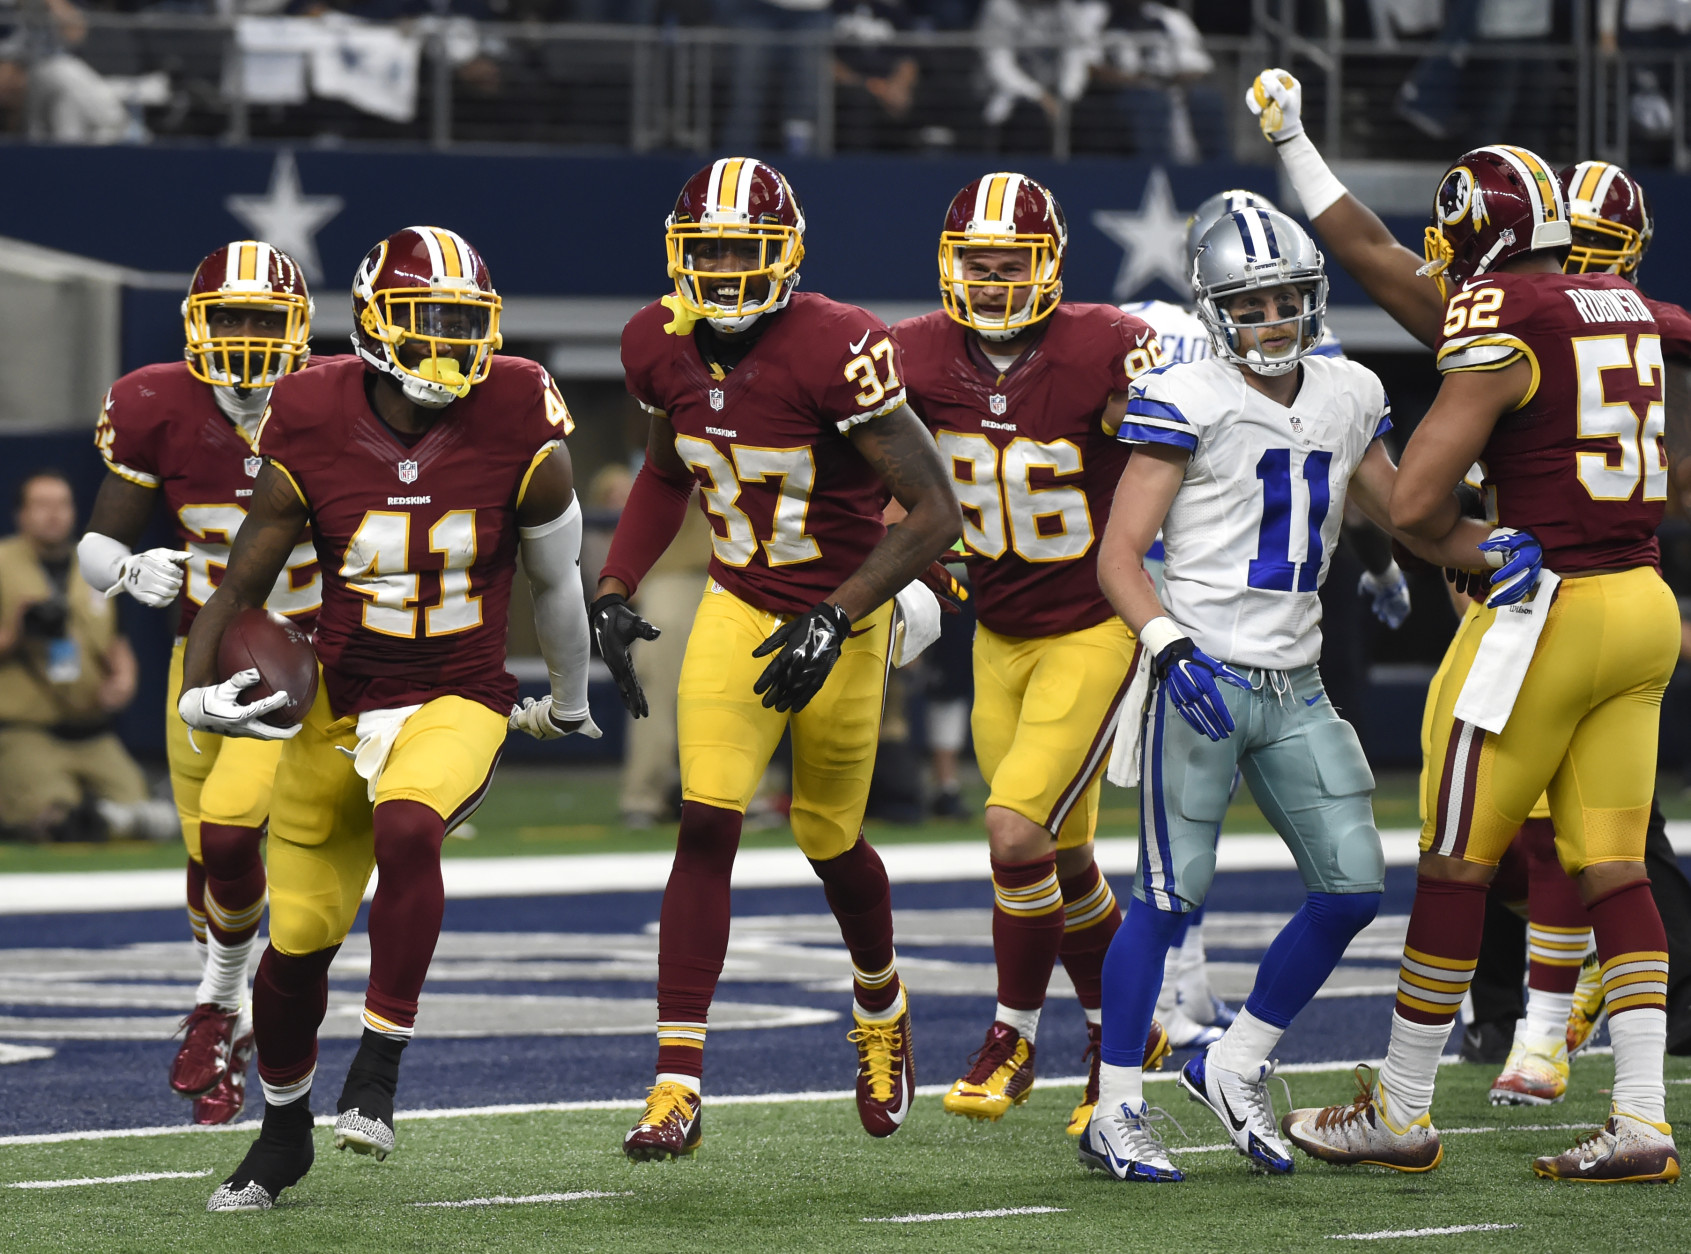 Washington Redskins' Will Blackmon (41) celebrates with Jeremy Harris (37), Houston Bates (96) and Keenan Robinson (52) after intercepting a pass intended for Dallas Cowboys wide receiver Cole Beasley (11) near the goal line in the second half of an NFL football game, Sunday, Jan. 3, 2016, in Arlington, Texas. (AP Photo/Michael Ainsworth)